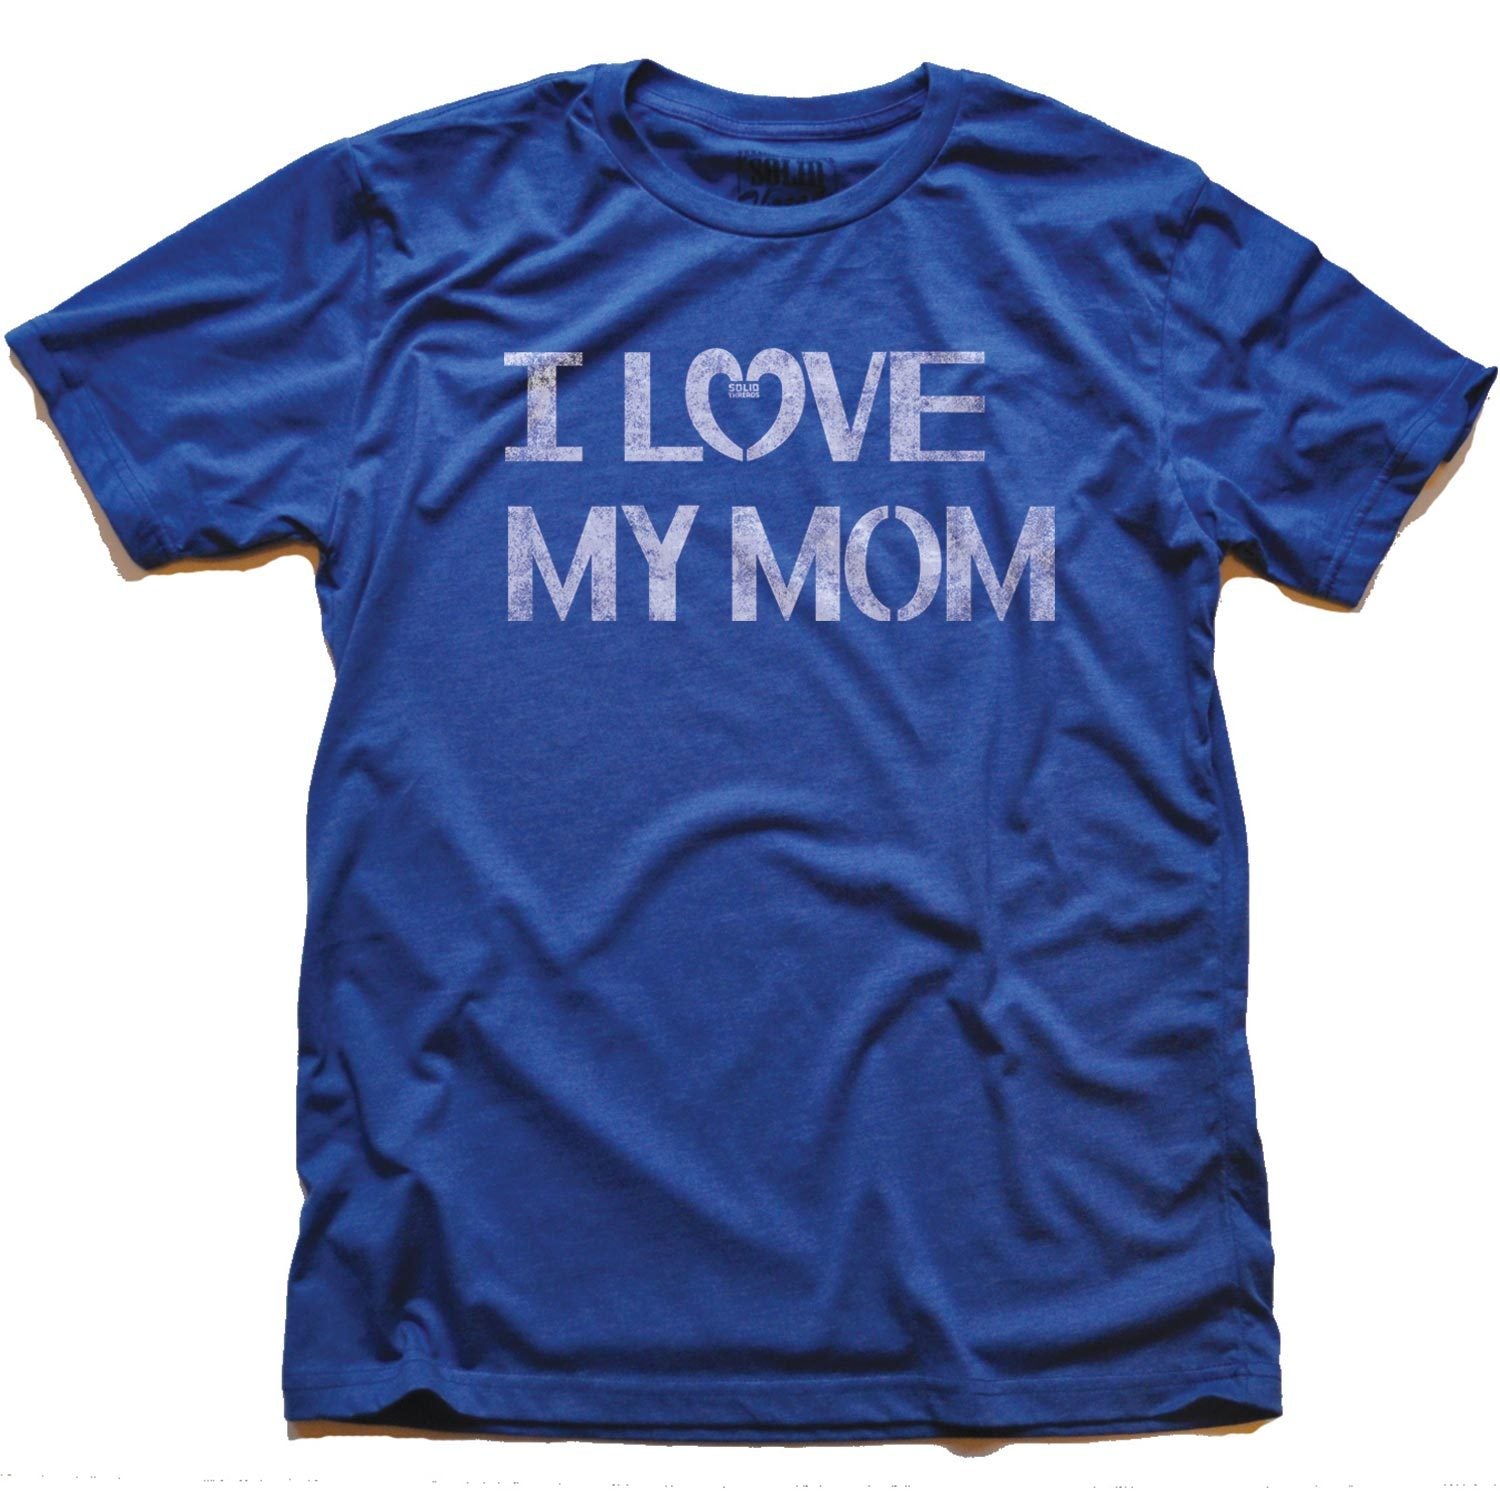 Men's I Love My Mom Vintage Inspired T-Shirt | Retro Loving Family Graphic Tee | Solid Threads